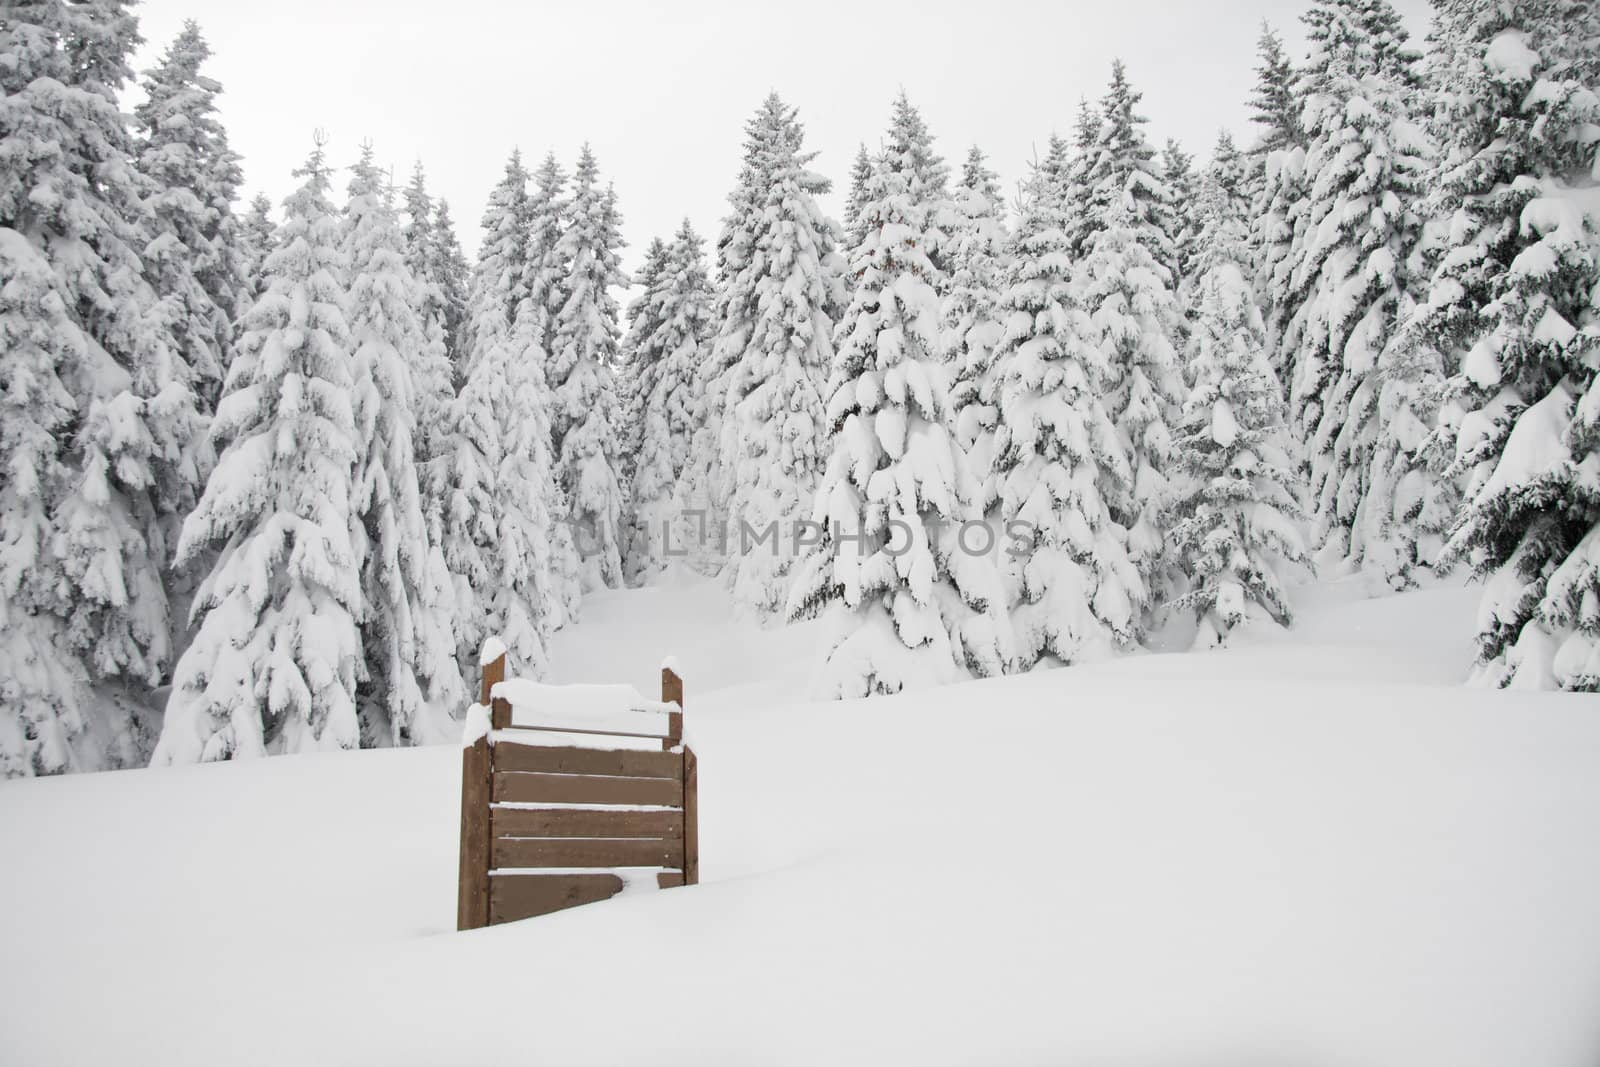 Sign in a snowy forest, broader view by Lamarinx